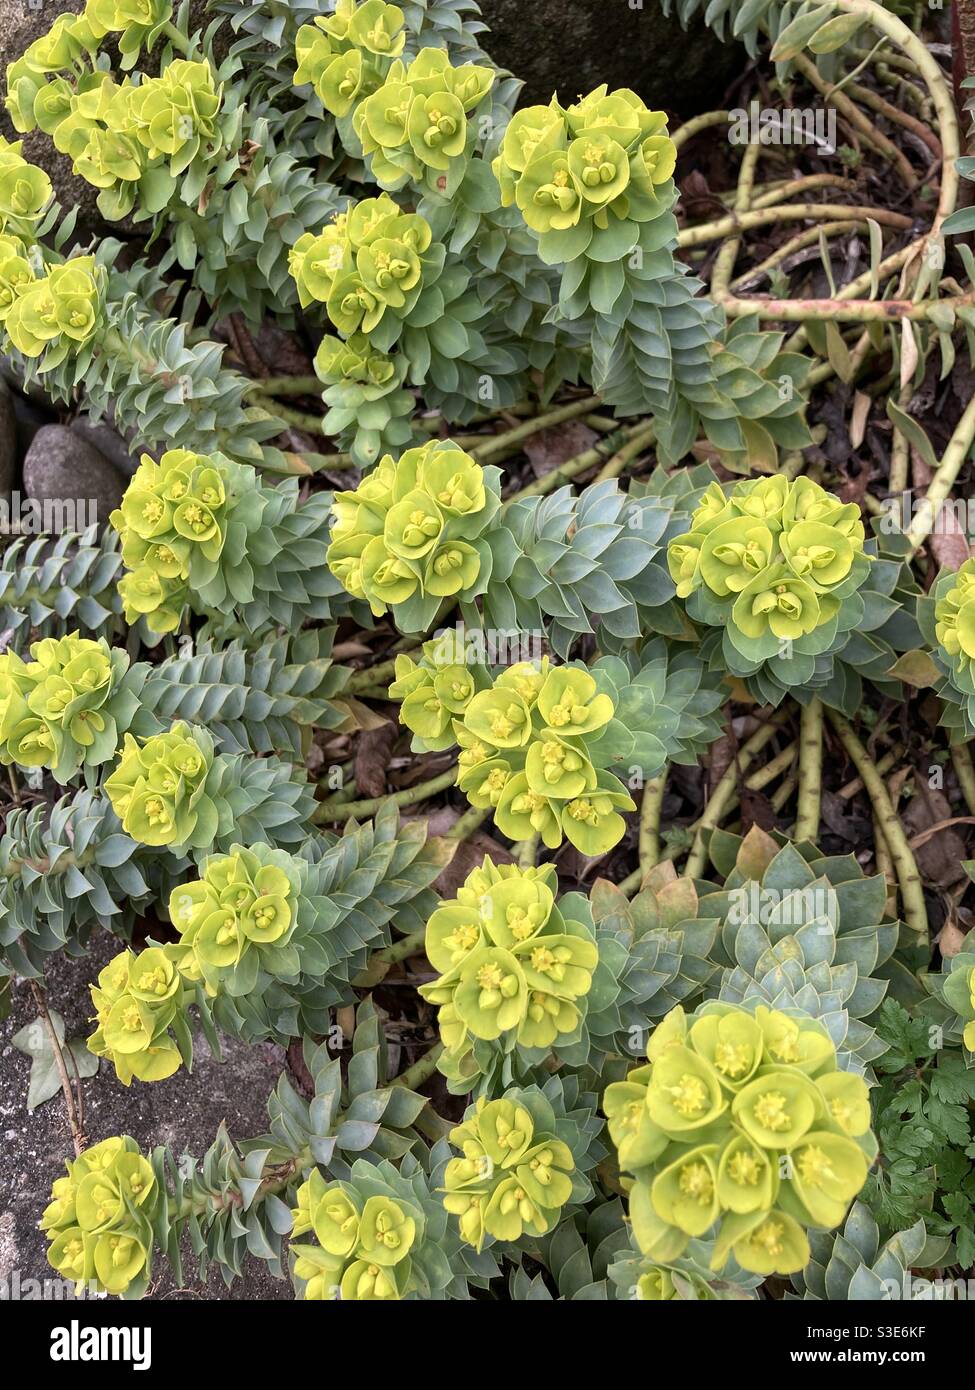 Myrtle Spurge plant (also known as a donkeytail , creeping spurge or blue spurge) Stock Photo